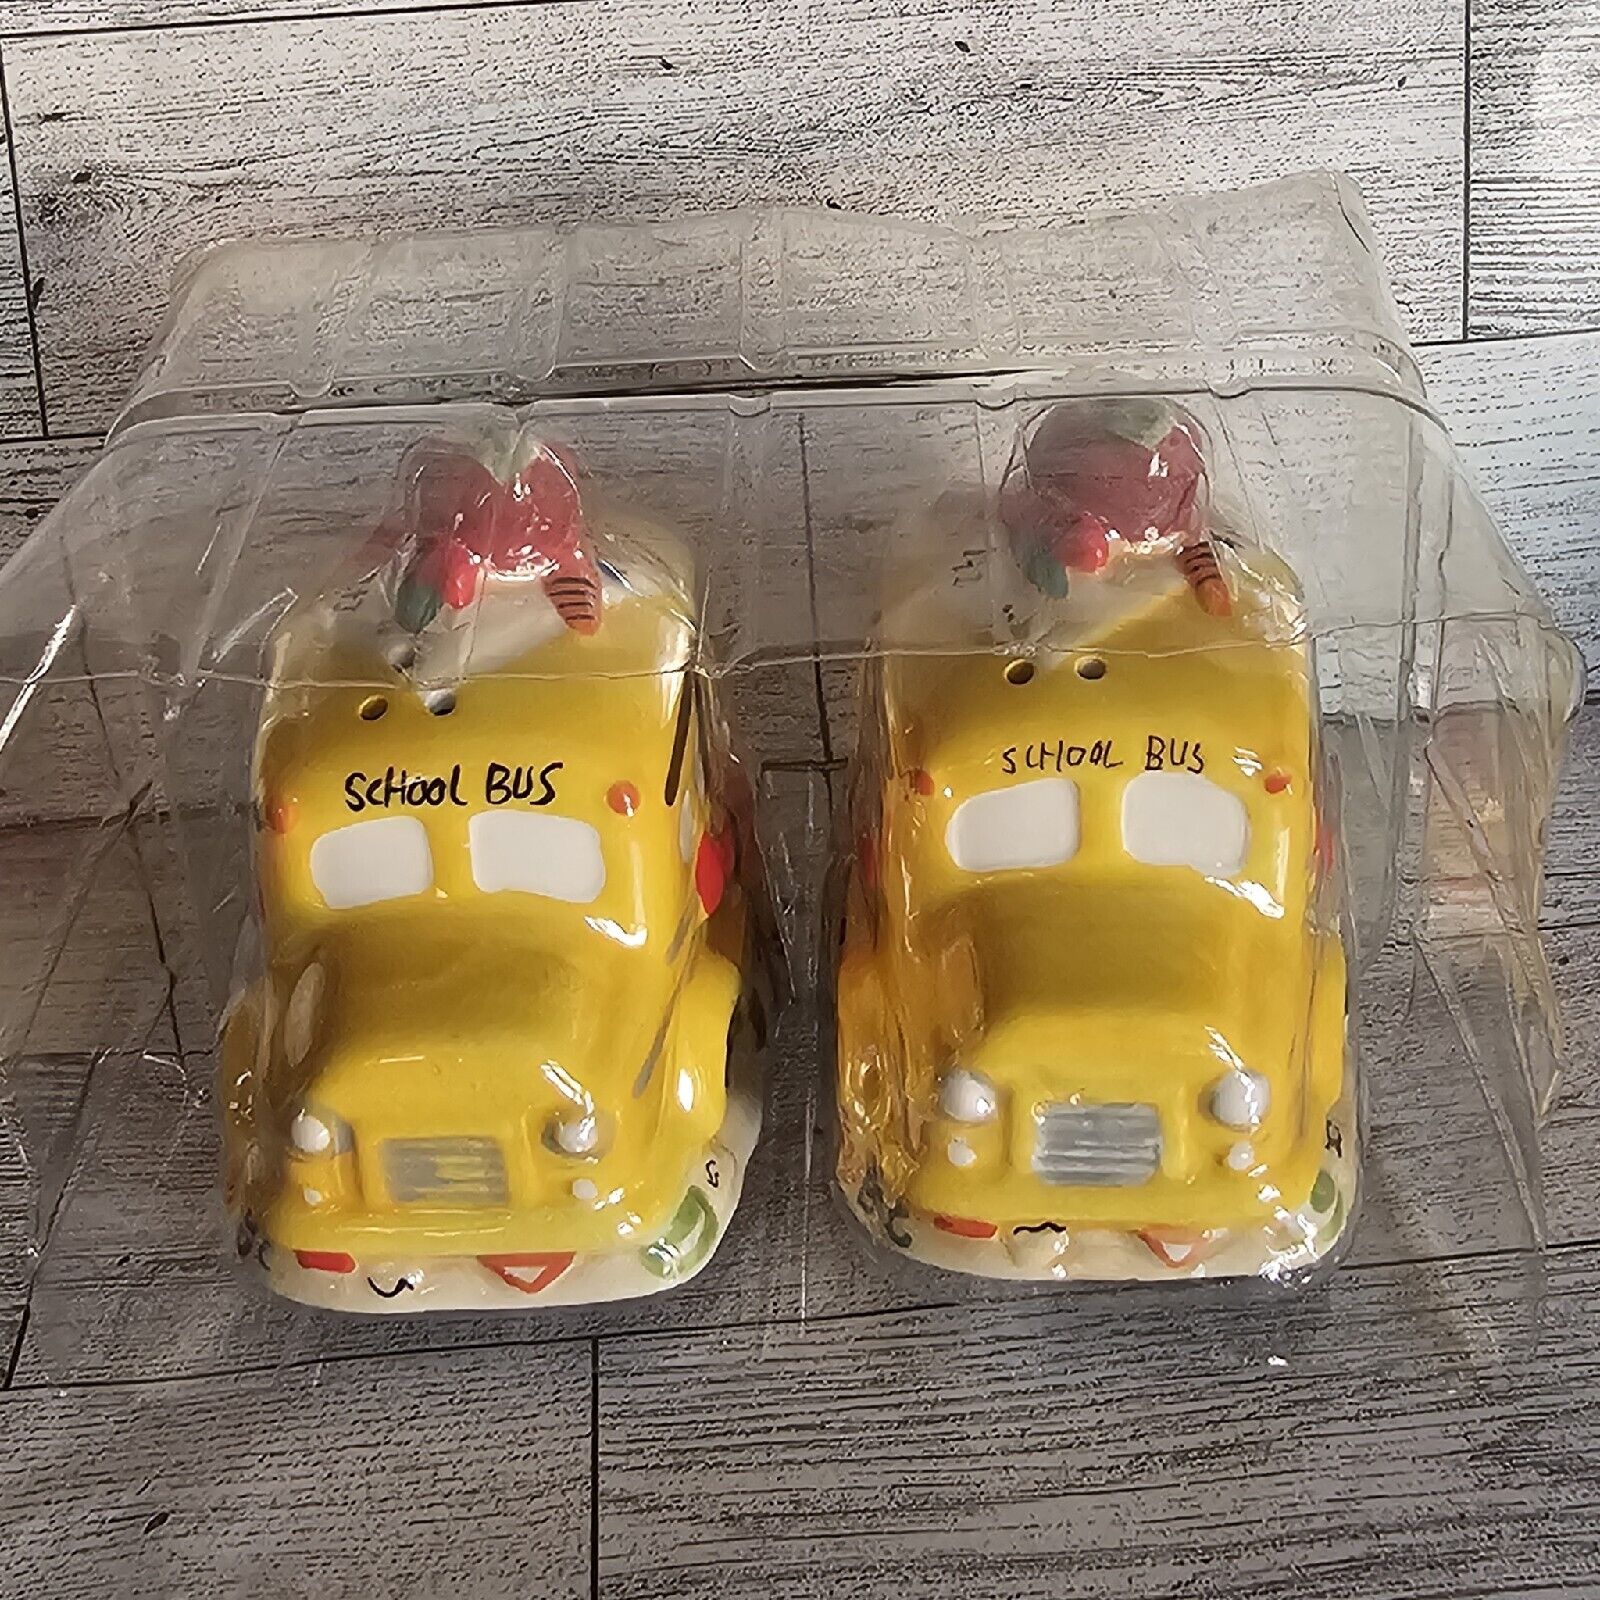 NEW School Bus Salt N Pepper Shakers Double Dutch Bus Holiday Back to School